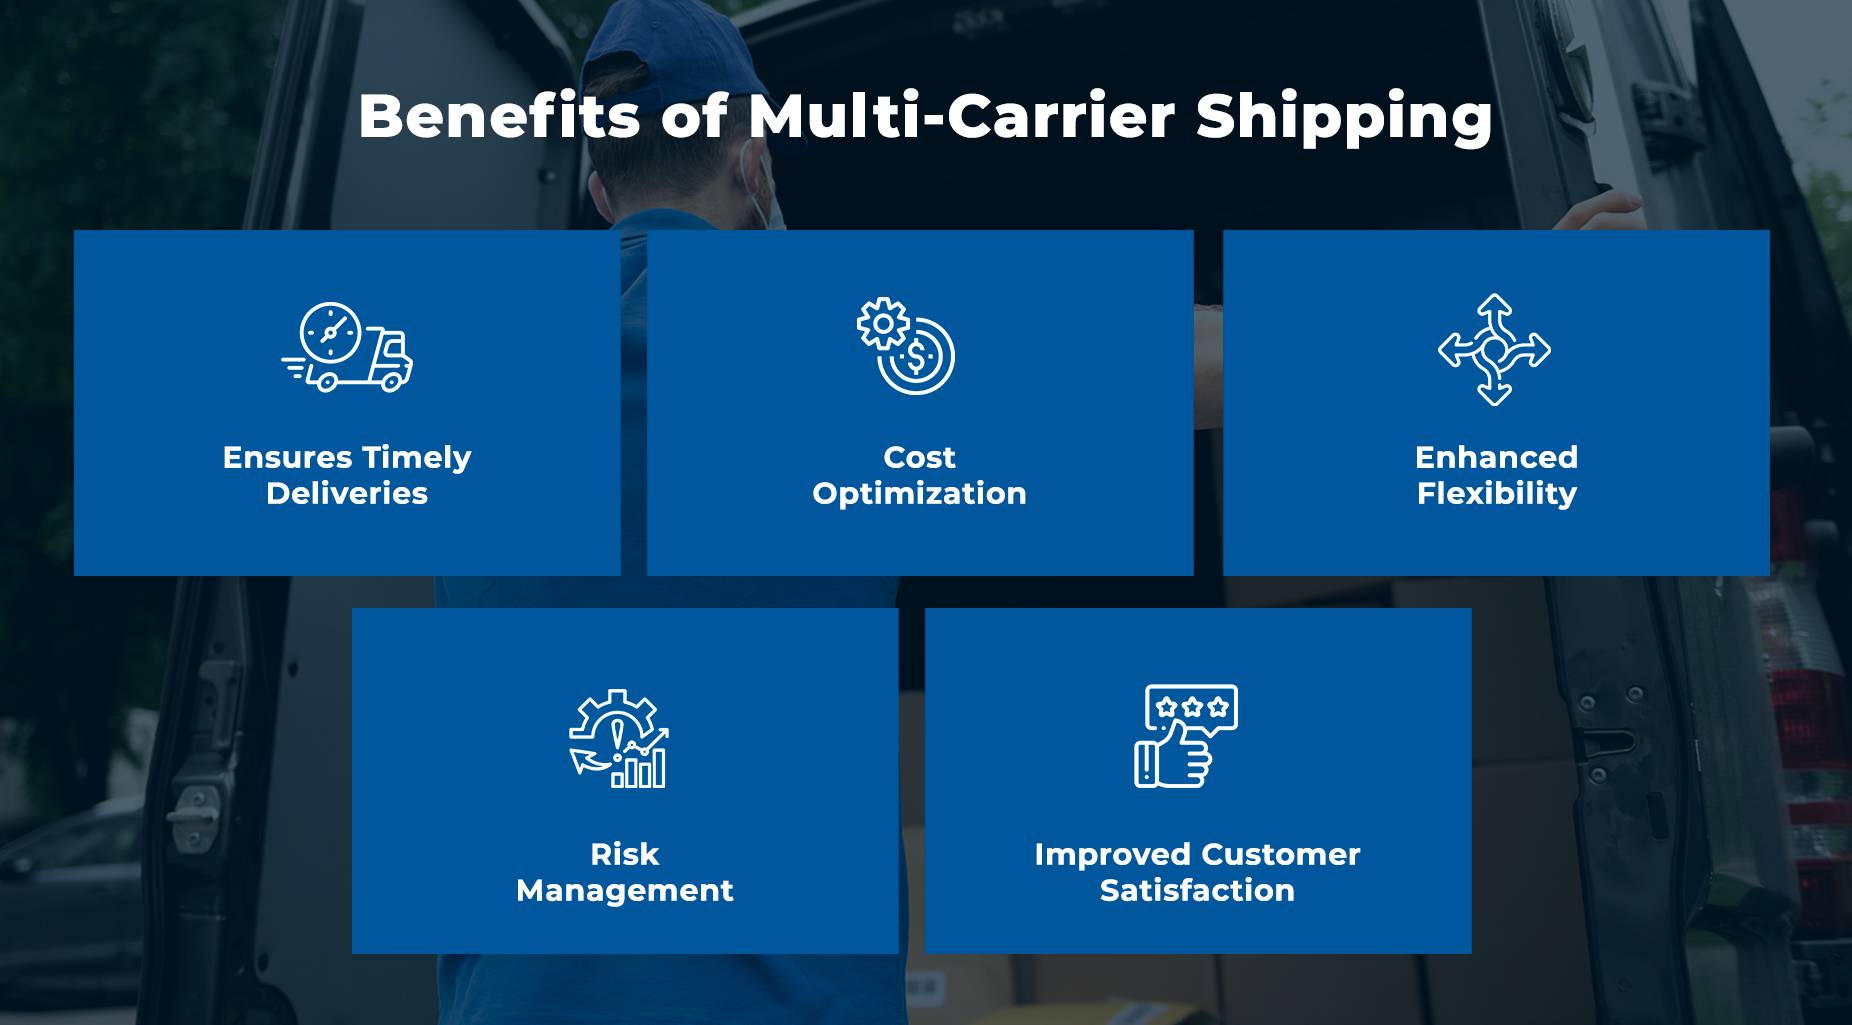 Benefits of Multi-Carrier Shipping